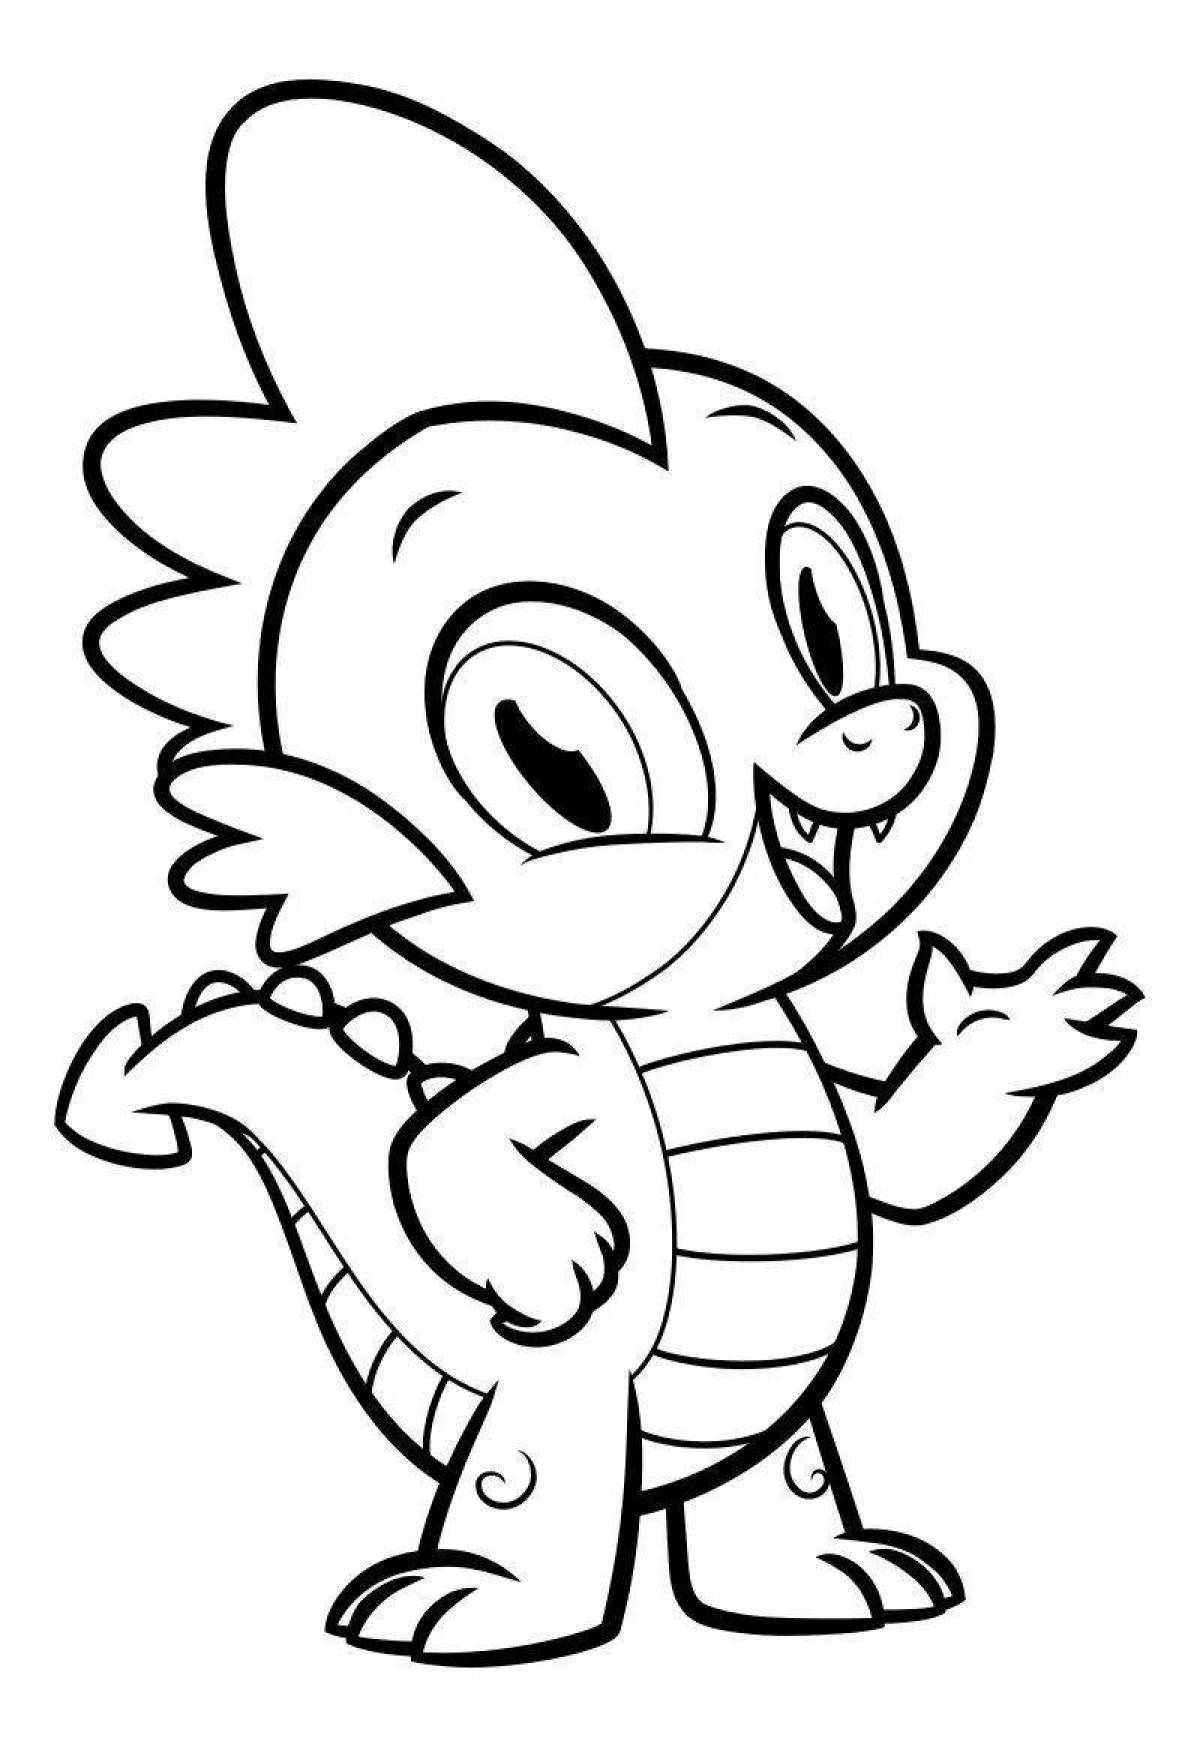 Vivacious coloring page spike